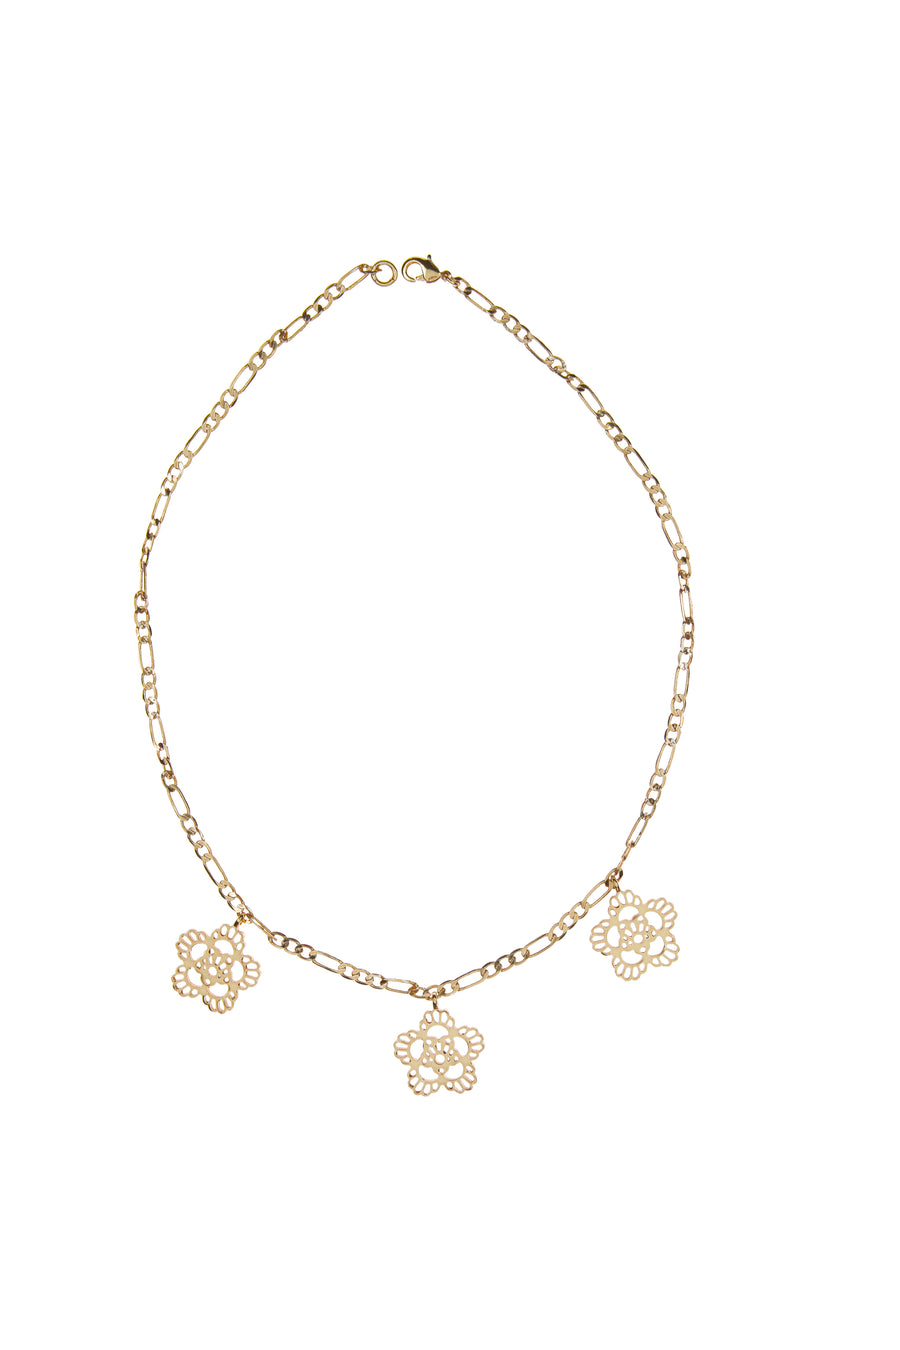 Triple Floral Iconic Necklace